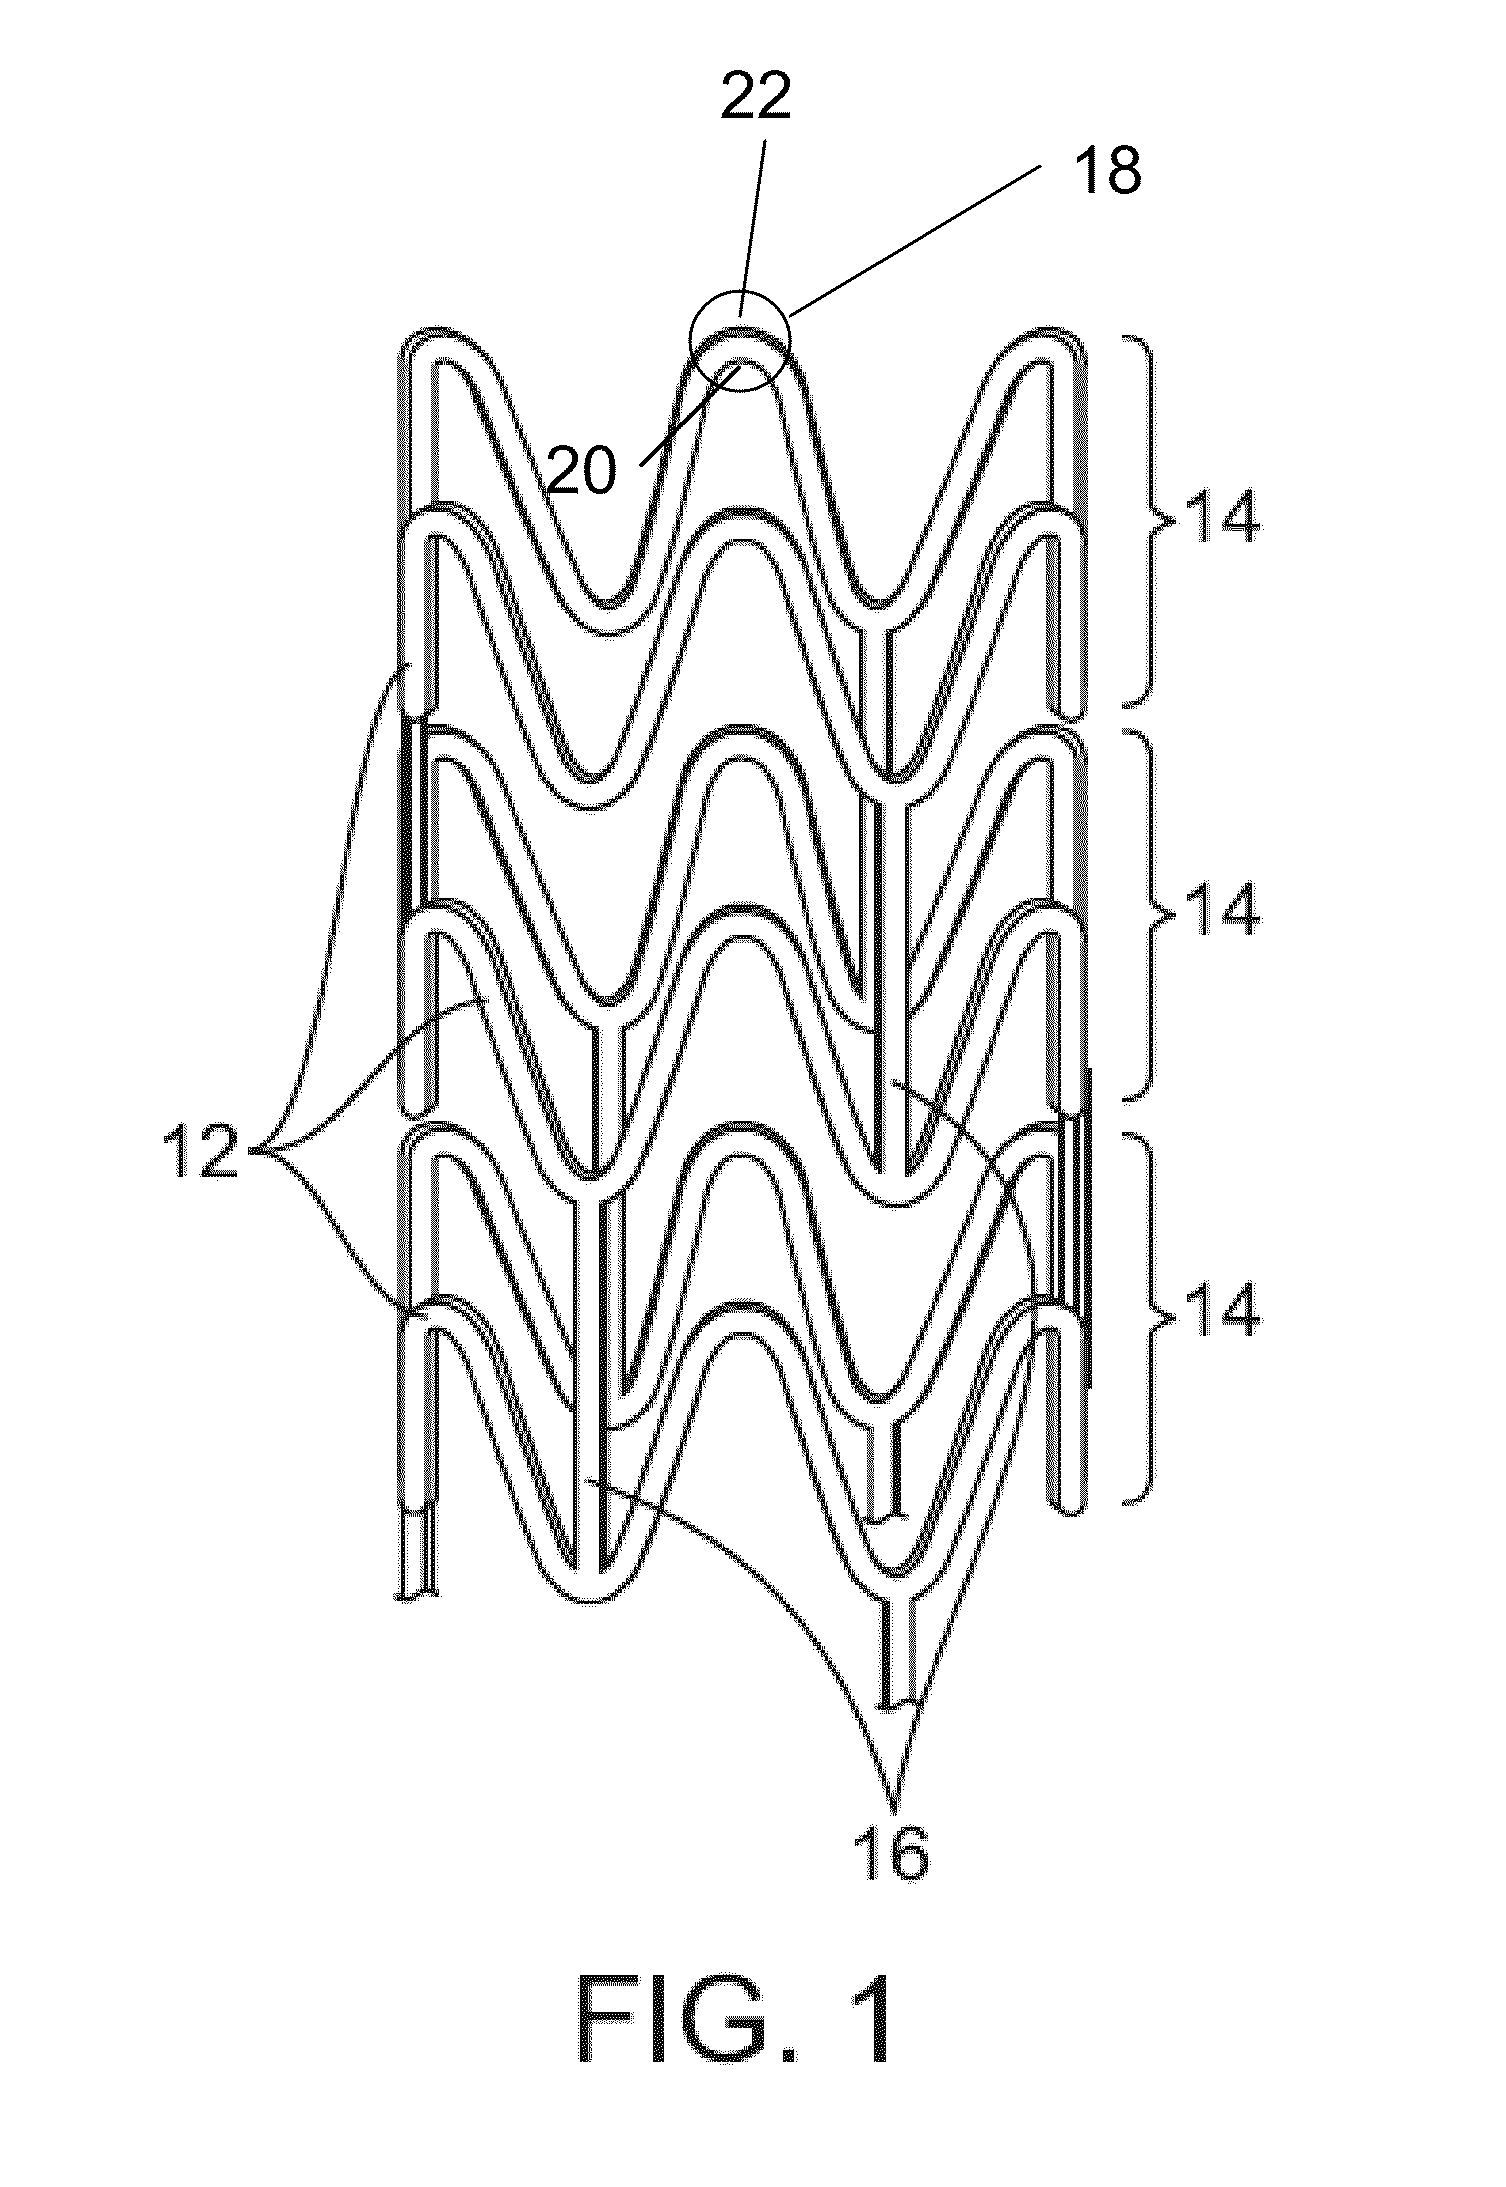 Laser System And Processing Conditions For Manufacturing Bioabsorbable Stents